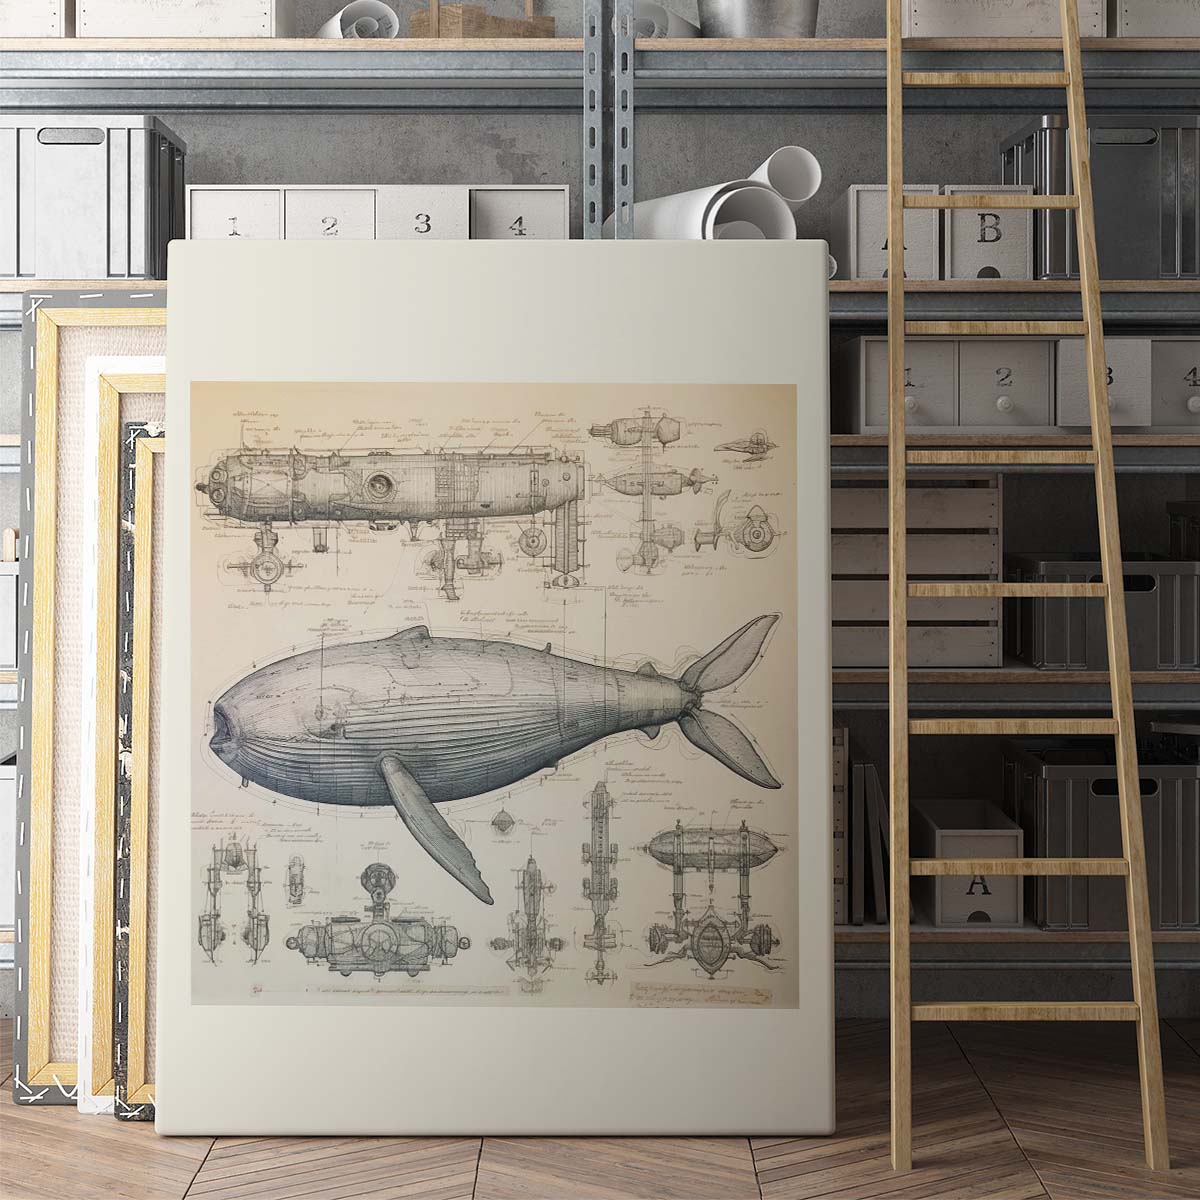 Drawings Whale Da Vinci Style Vintage Framed Canvas Prints Wall Art Hanging Home Decor